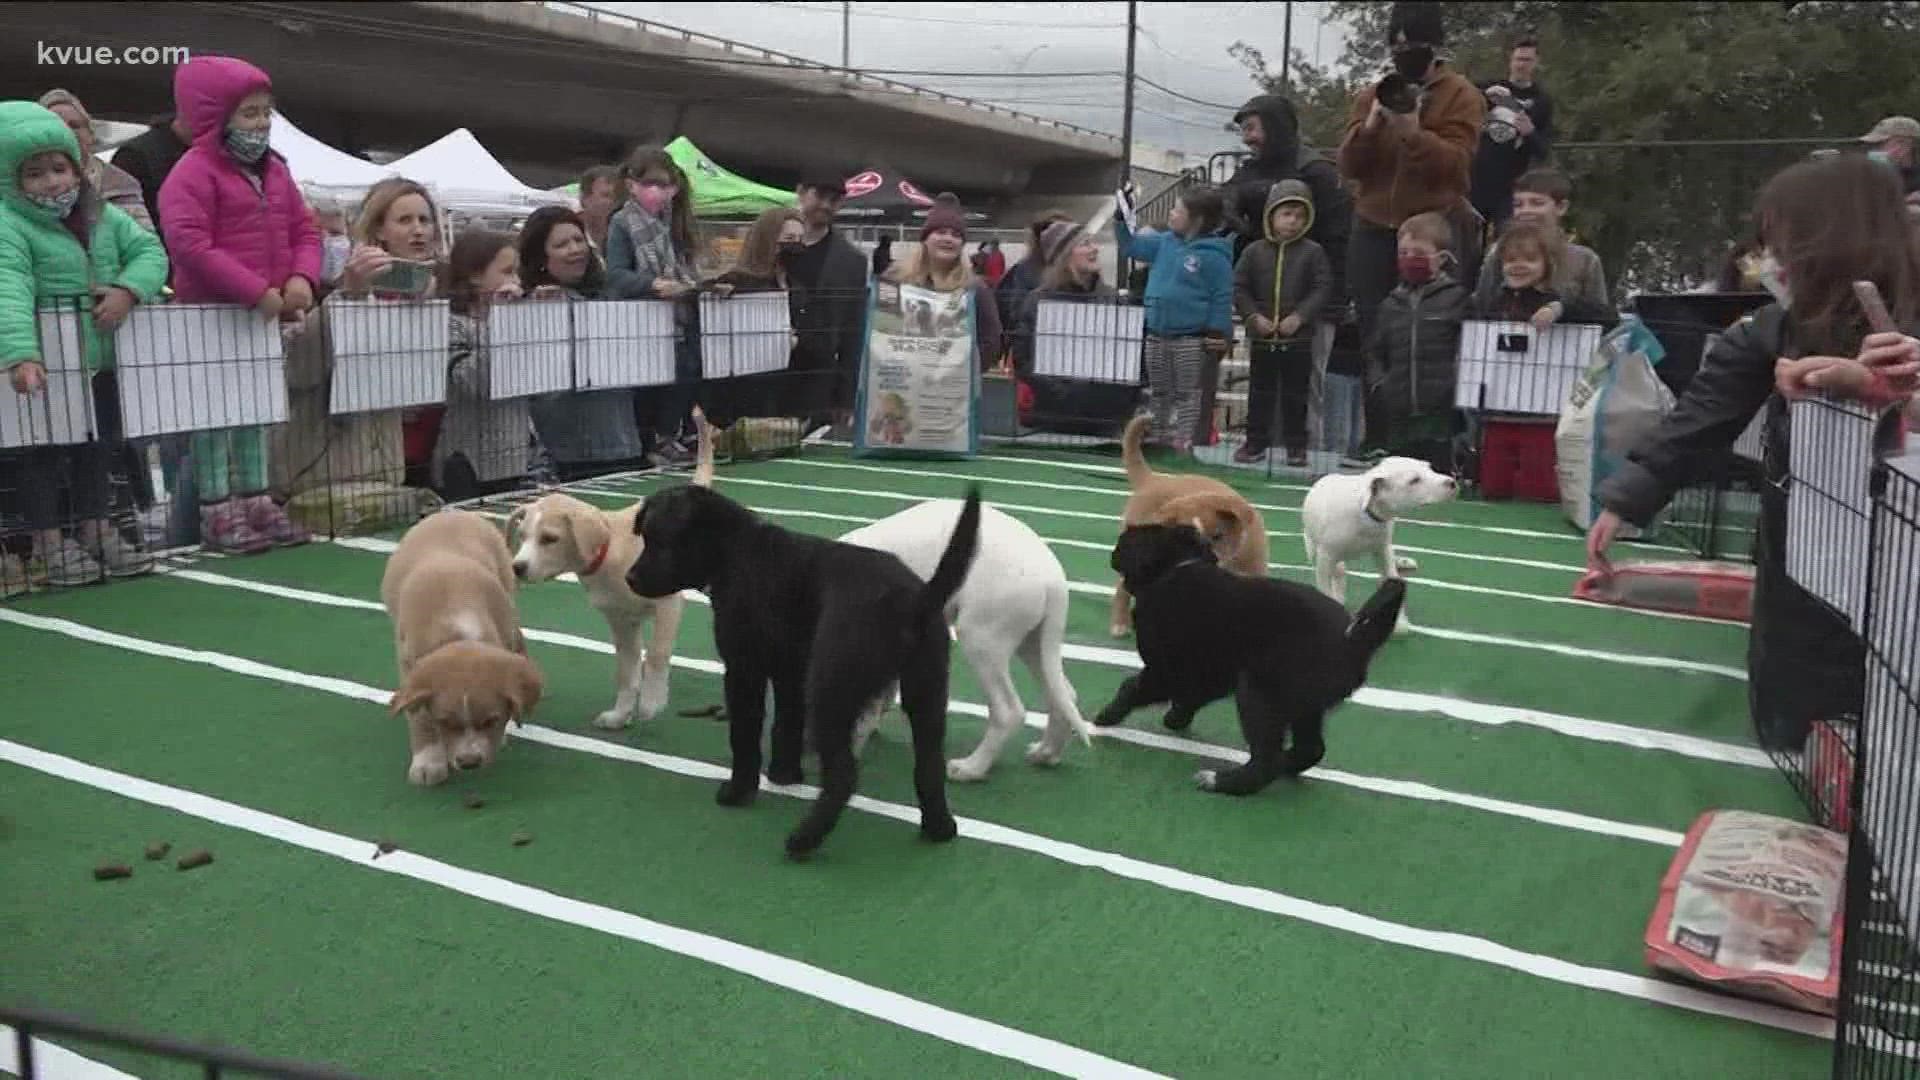 The 15th annual Puppy Bowl featured puppy races, Super Bowl predictions, vendors, a Kid Zone and more.